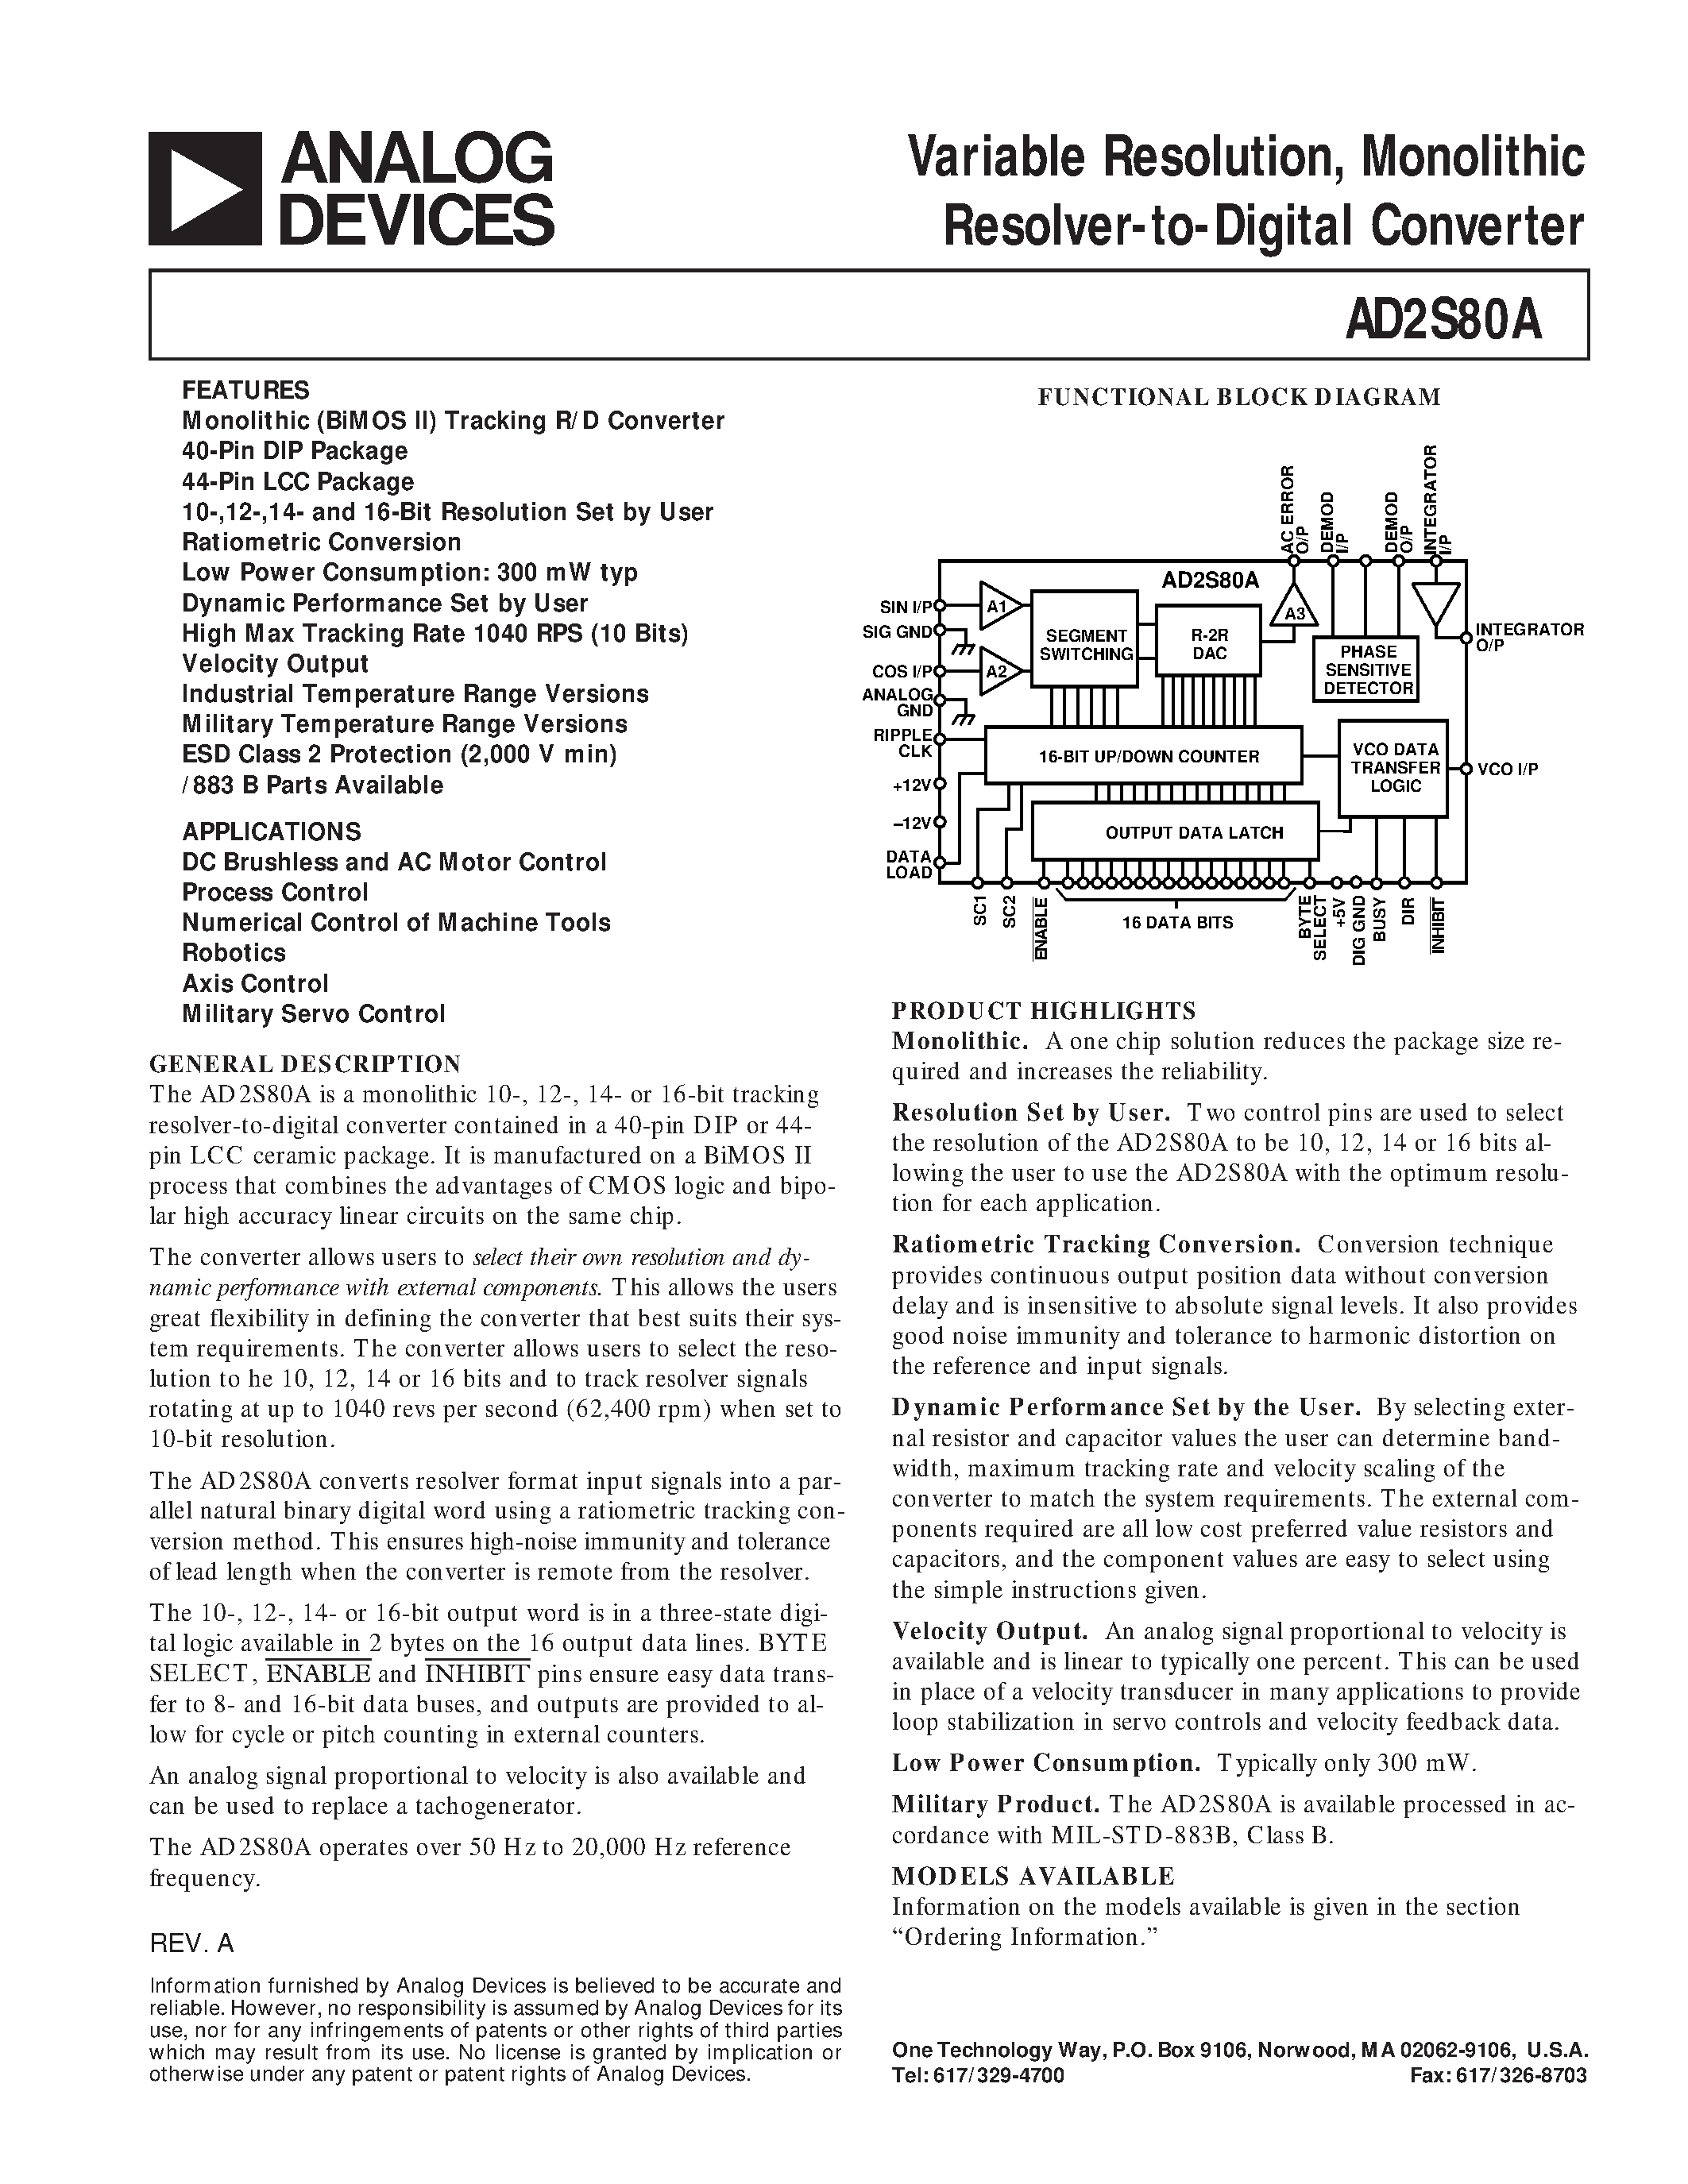 Datasheet AD2S80AUE - Variable Resolution/ Monolithic Resolver-to-Digital Converter page 1